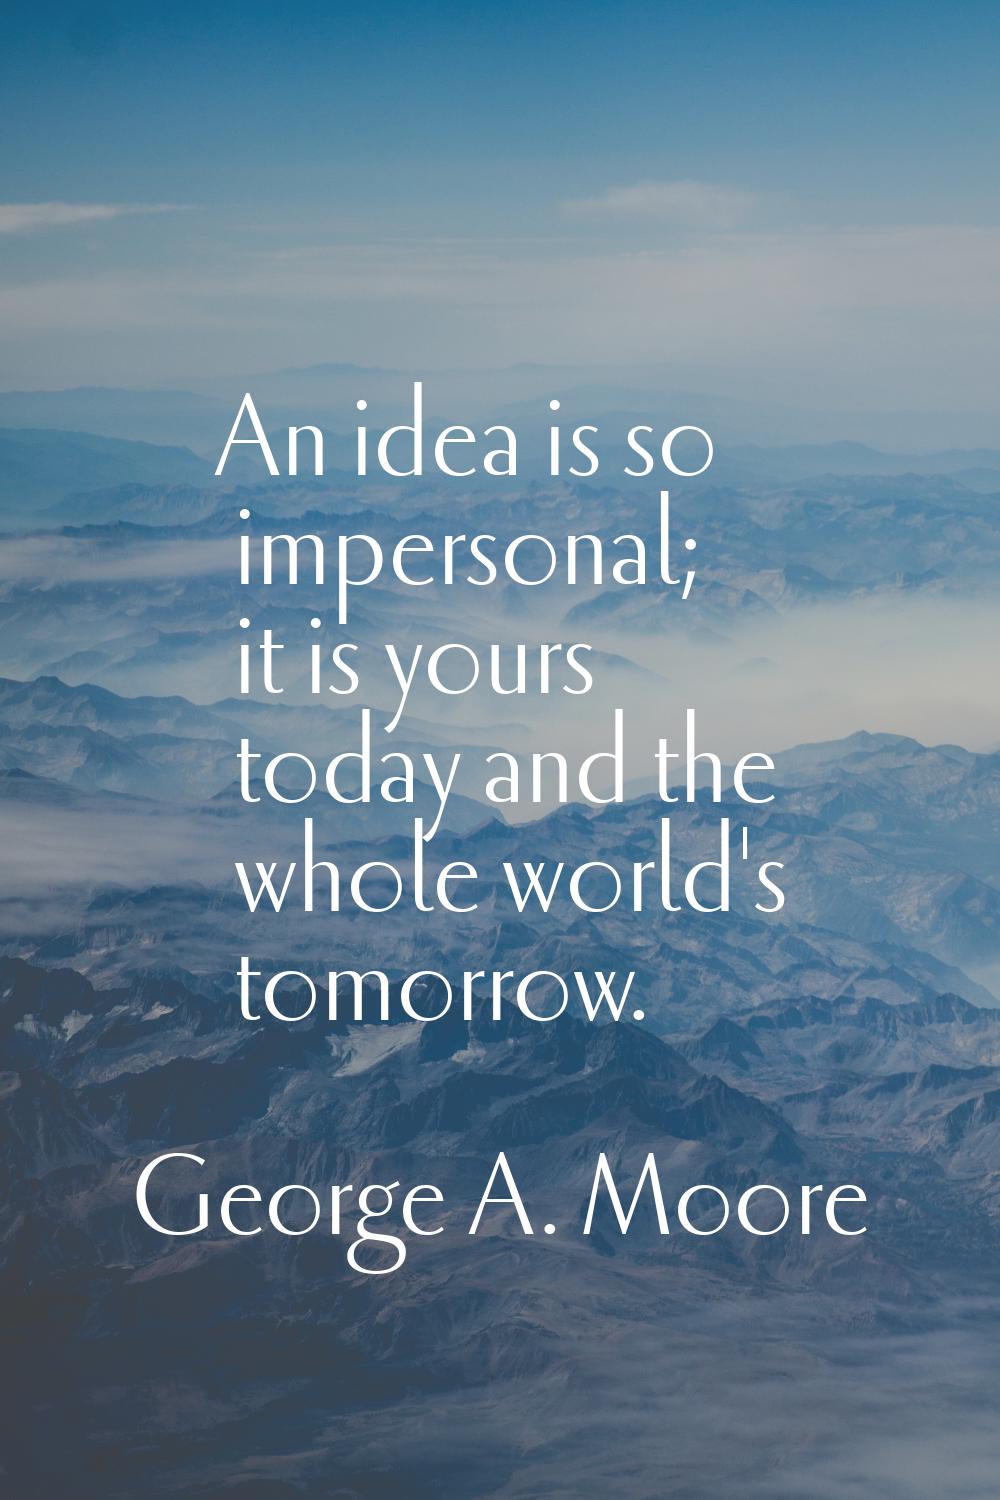 An idea is so impersonal; it is yours today and the whole world's tomorrow.